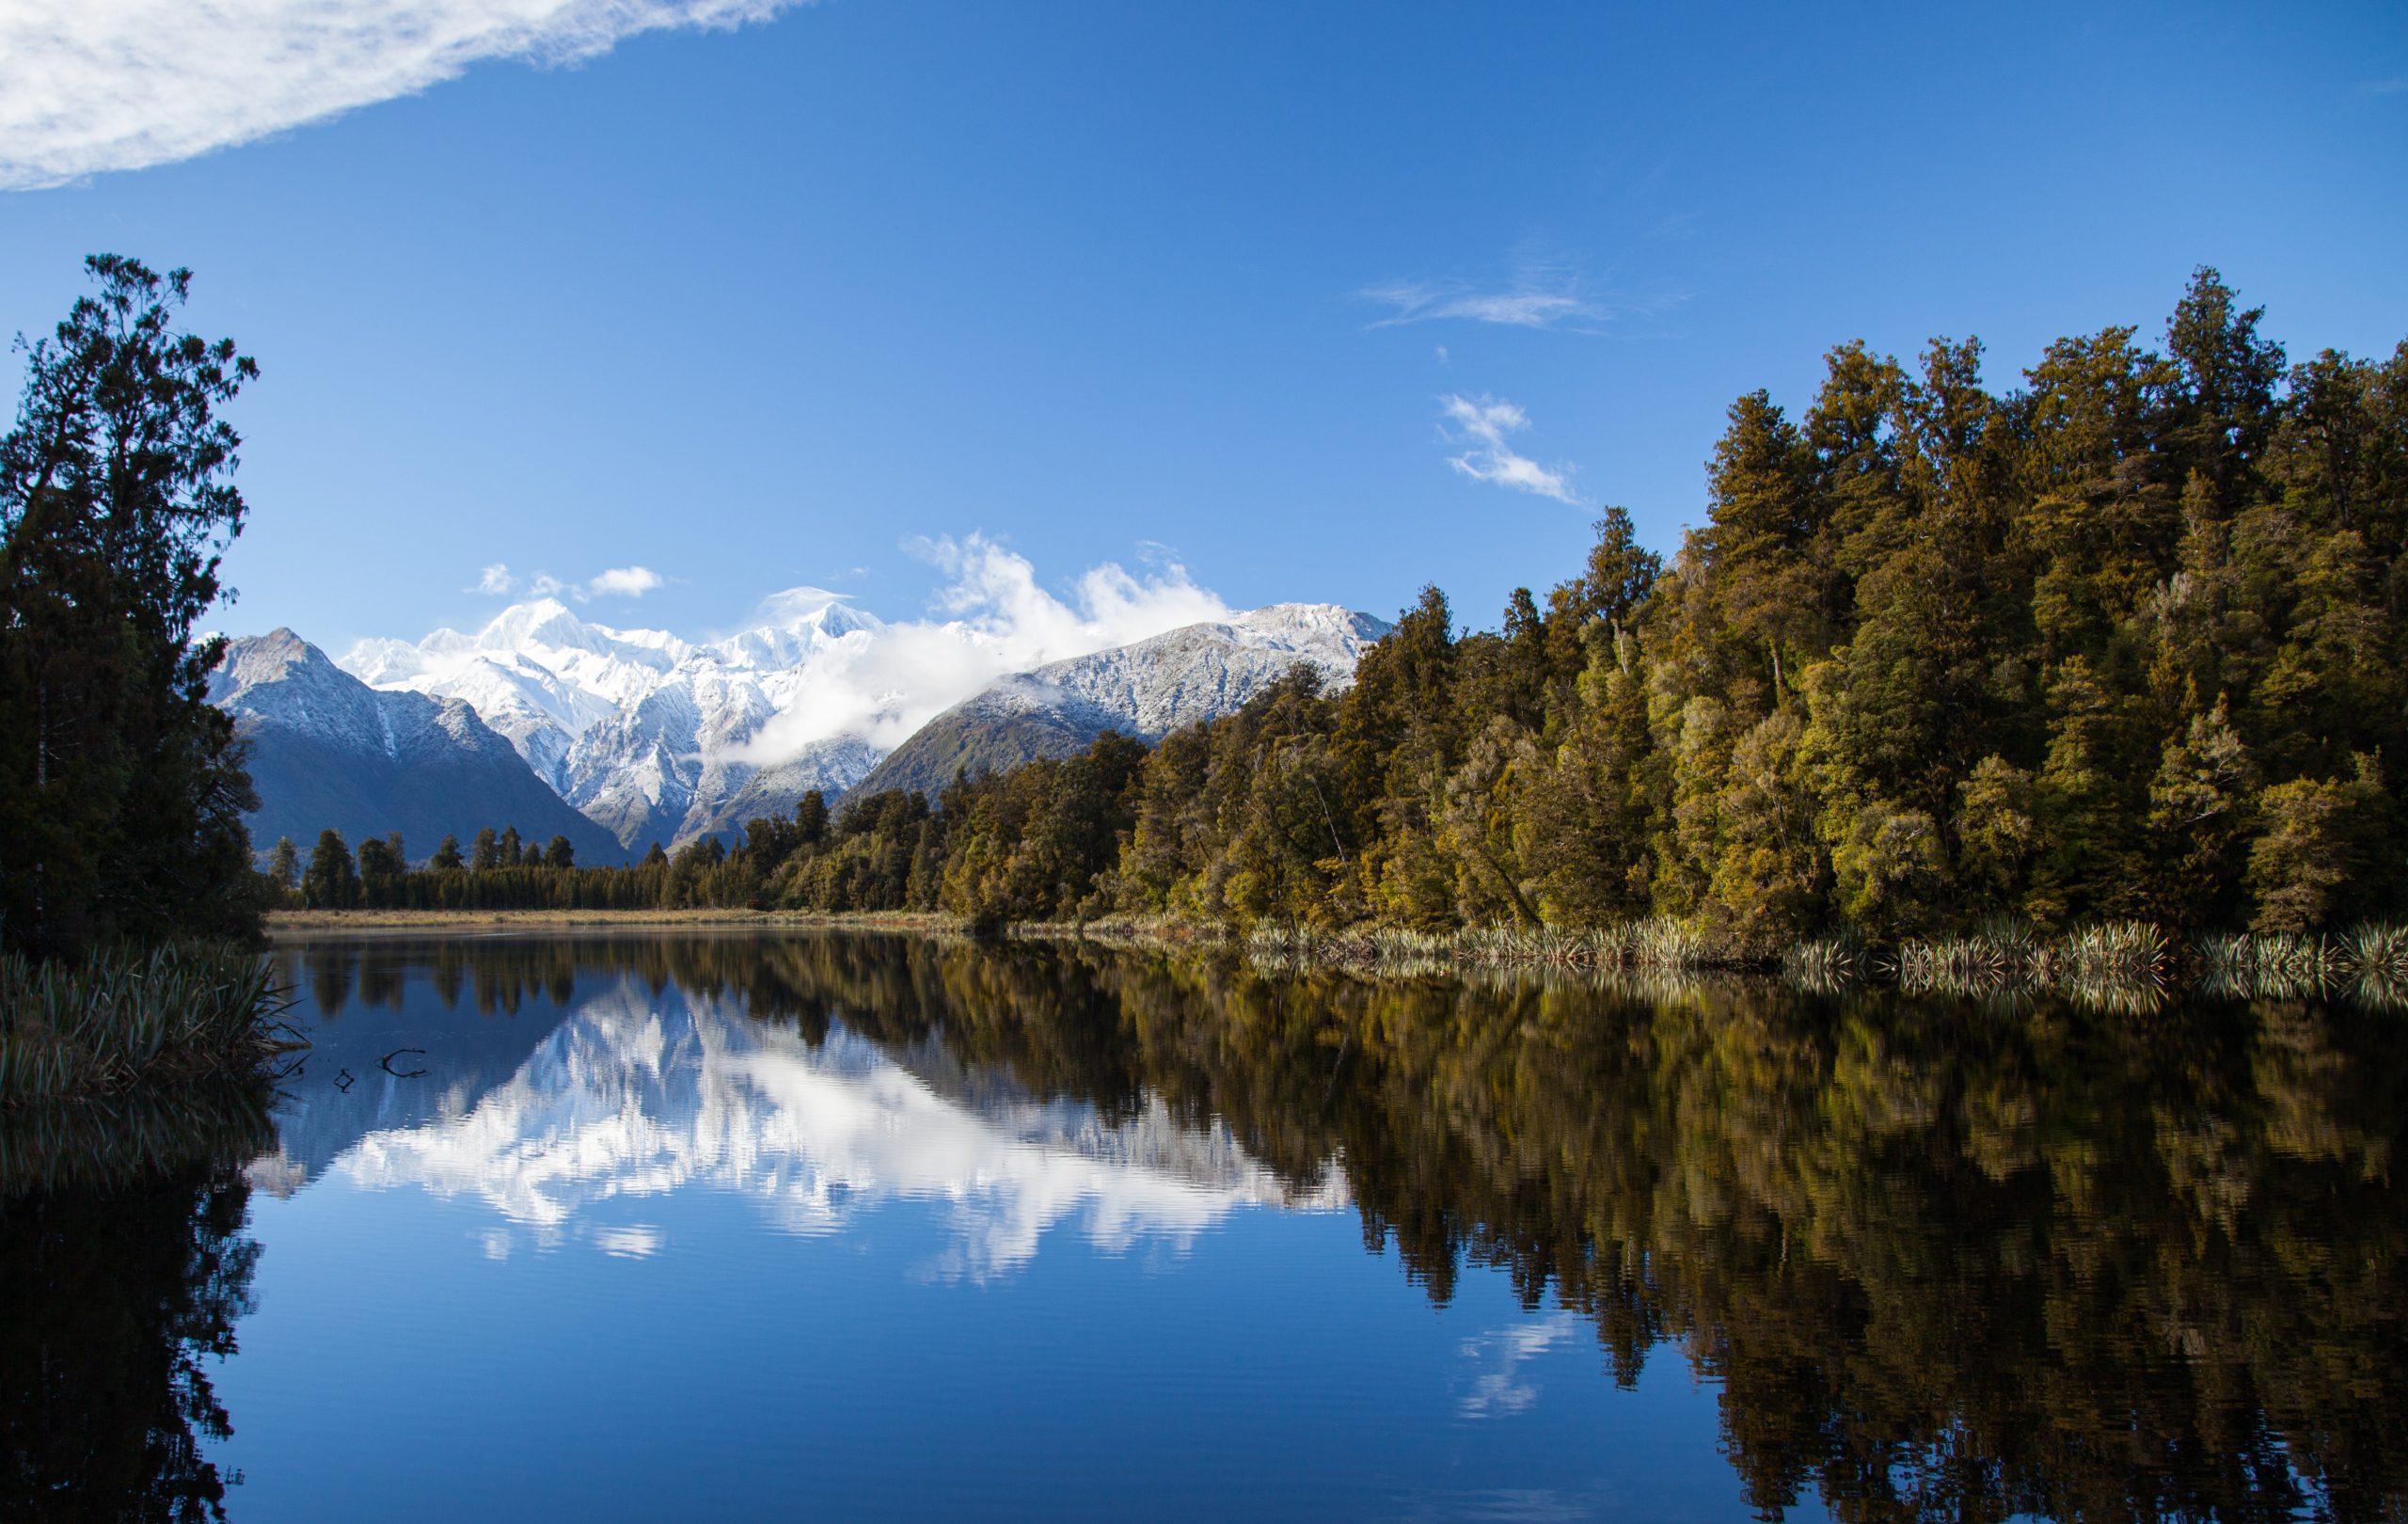 A reflective lake with snow-capped mountains reflected back into the water and forest on each side.